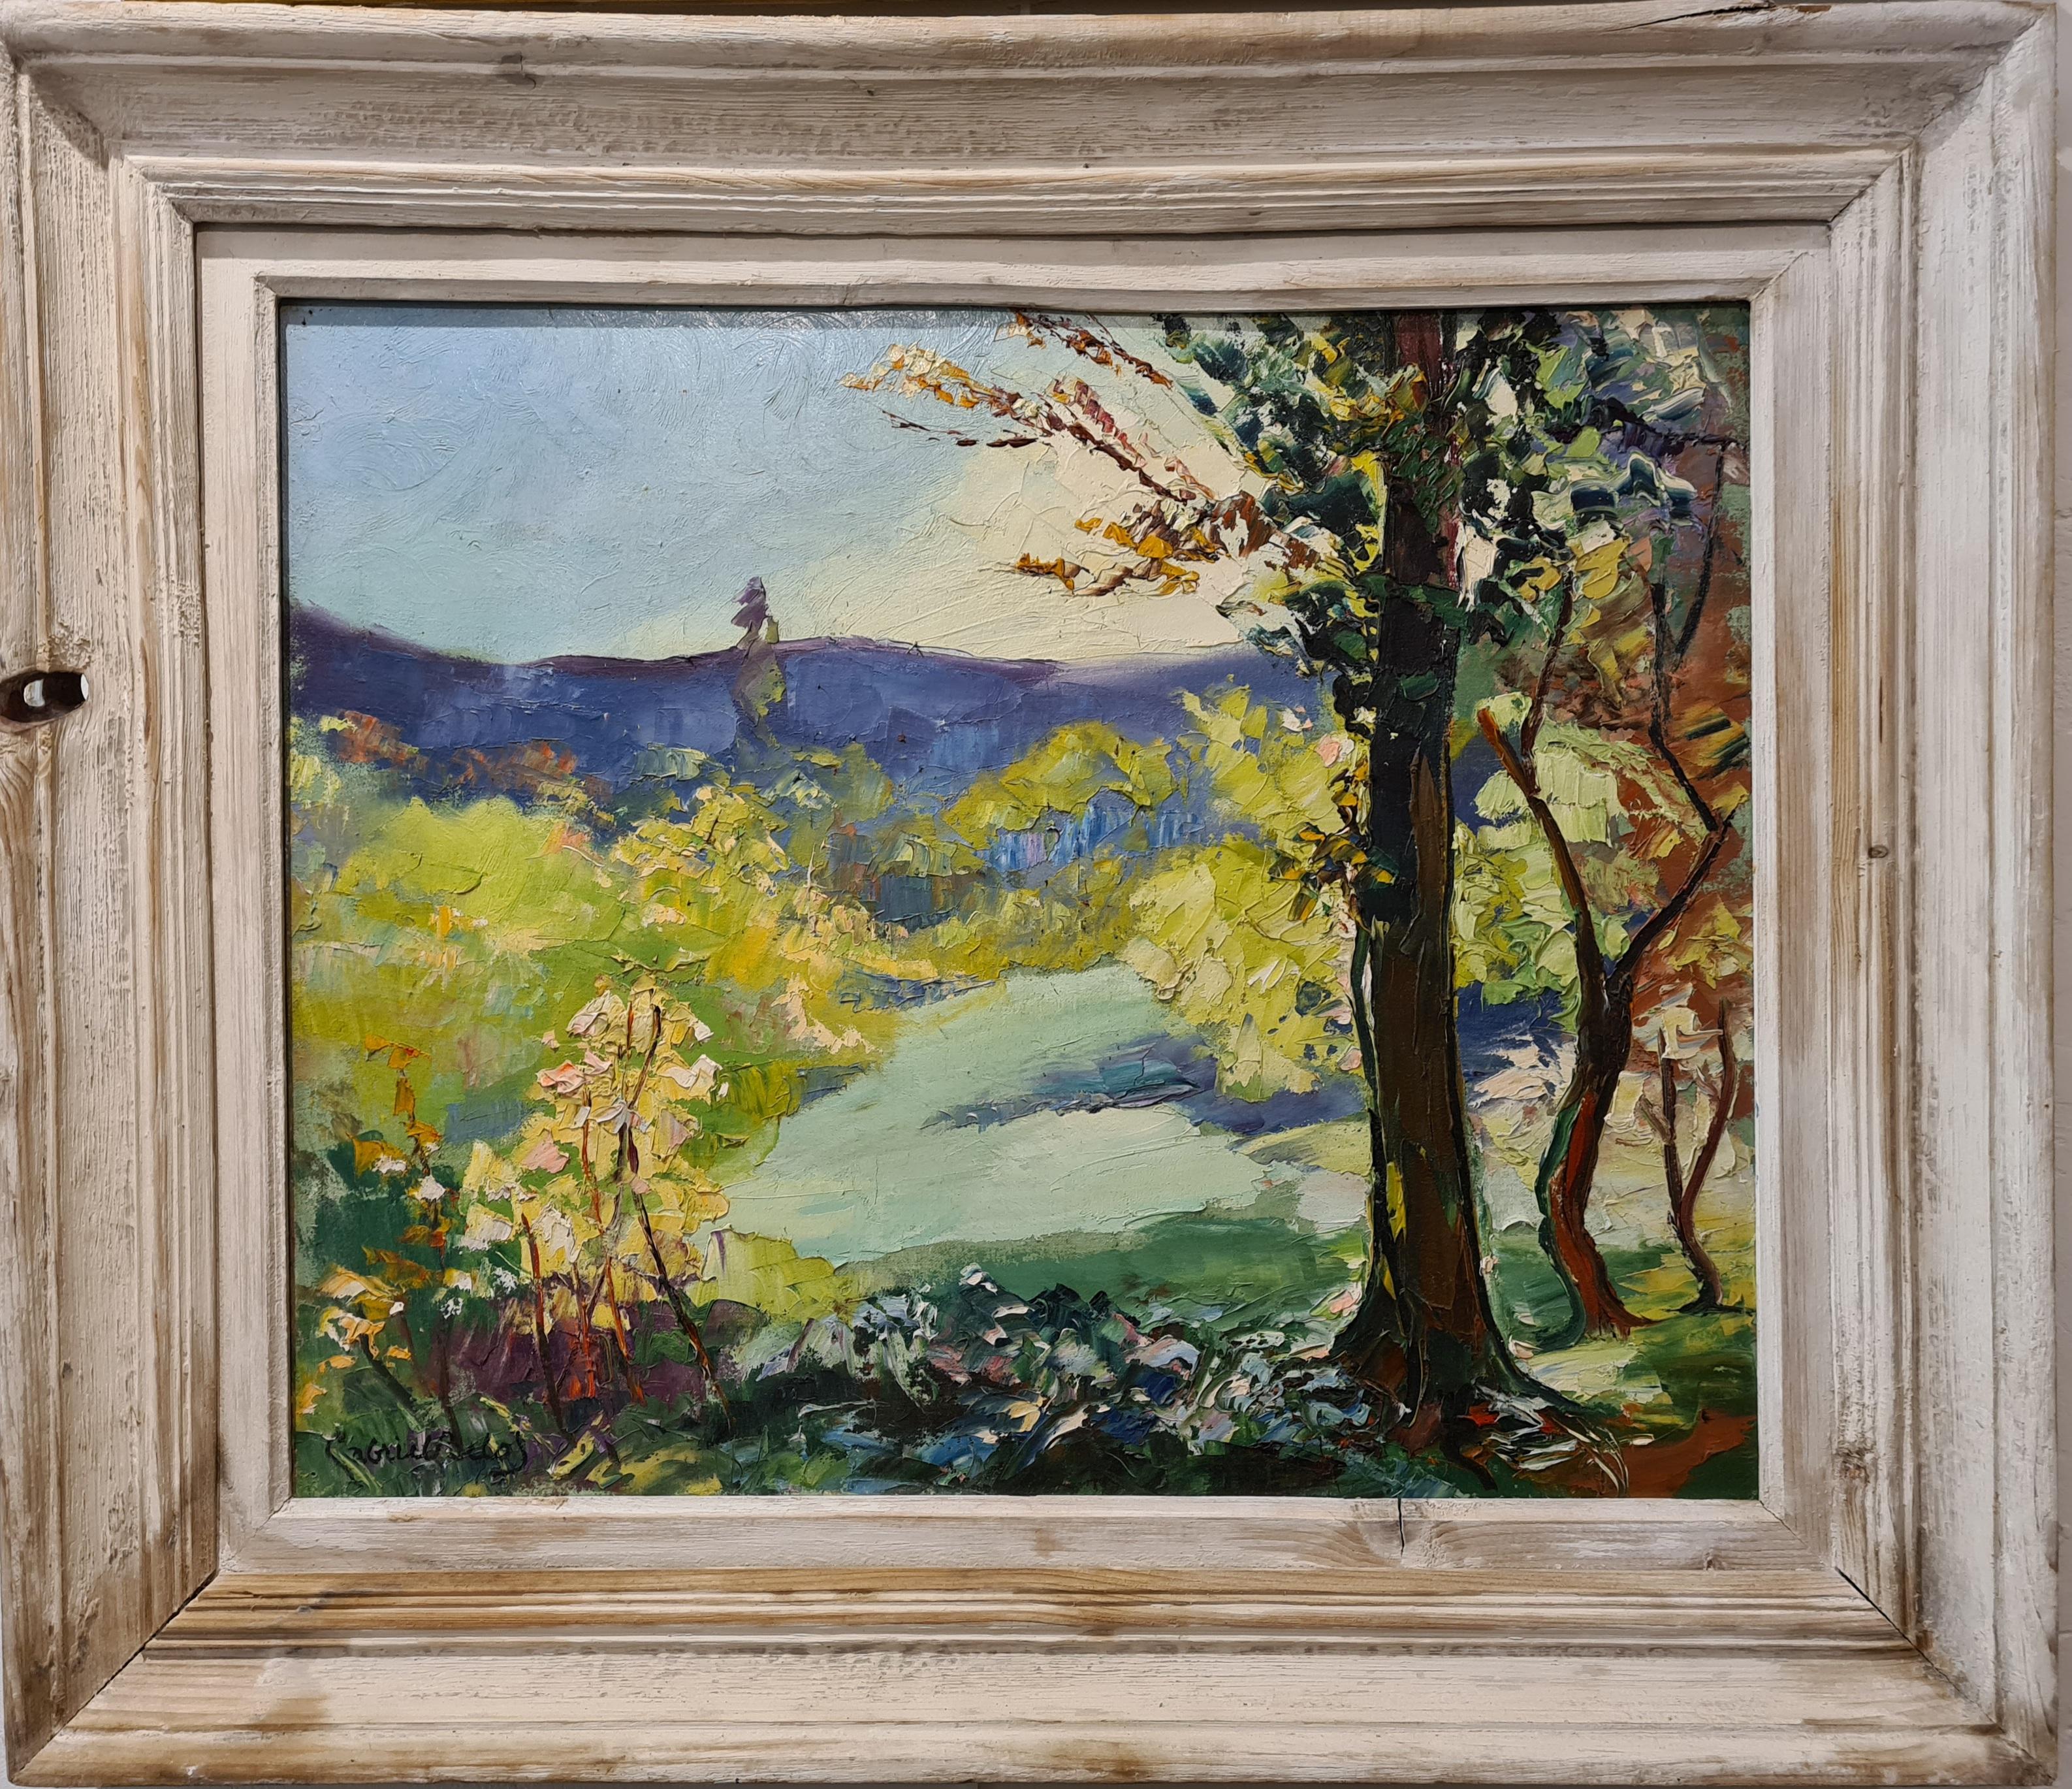 Pastoral Scene, Early 20th Century Fauvist Oil on Canvas. - Painting by Gabriel Belot